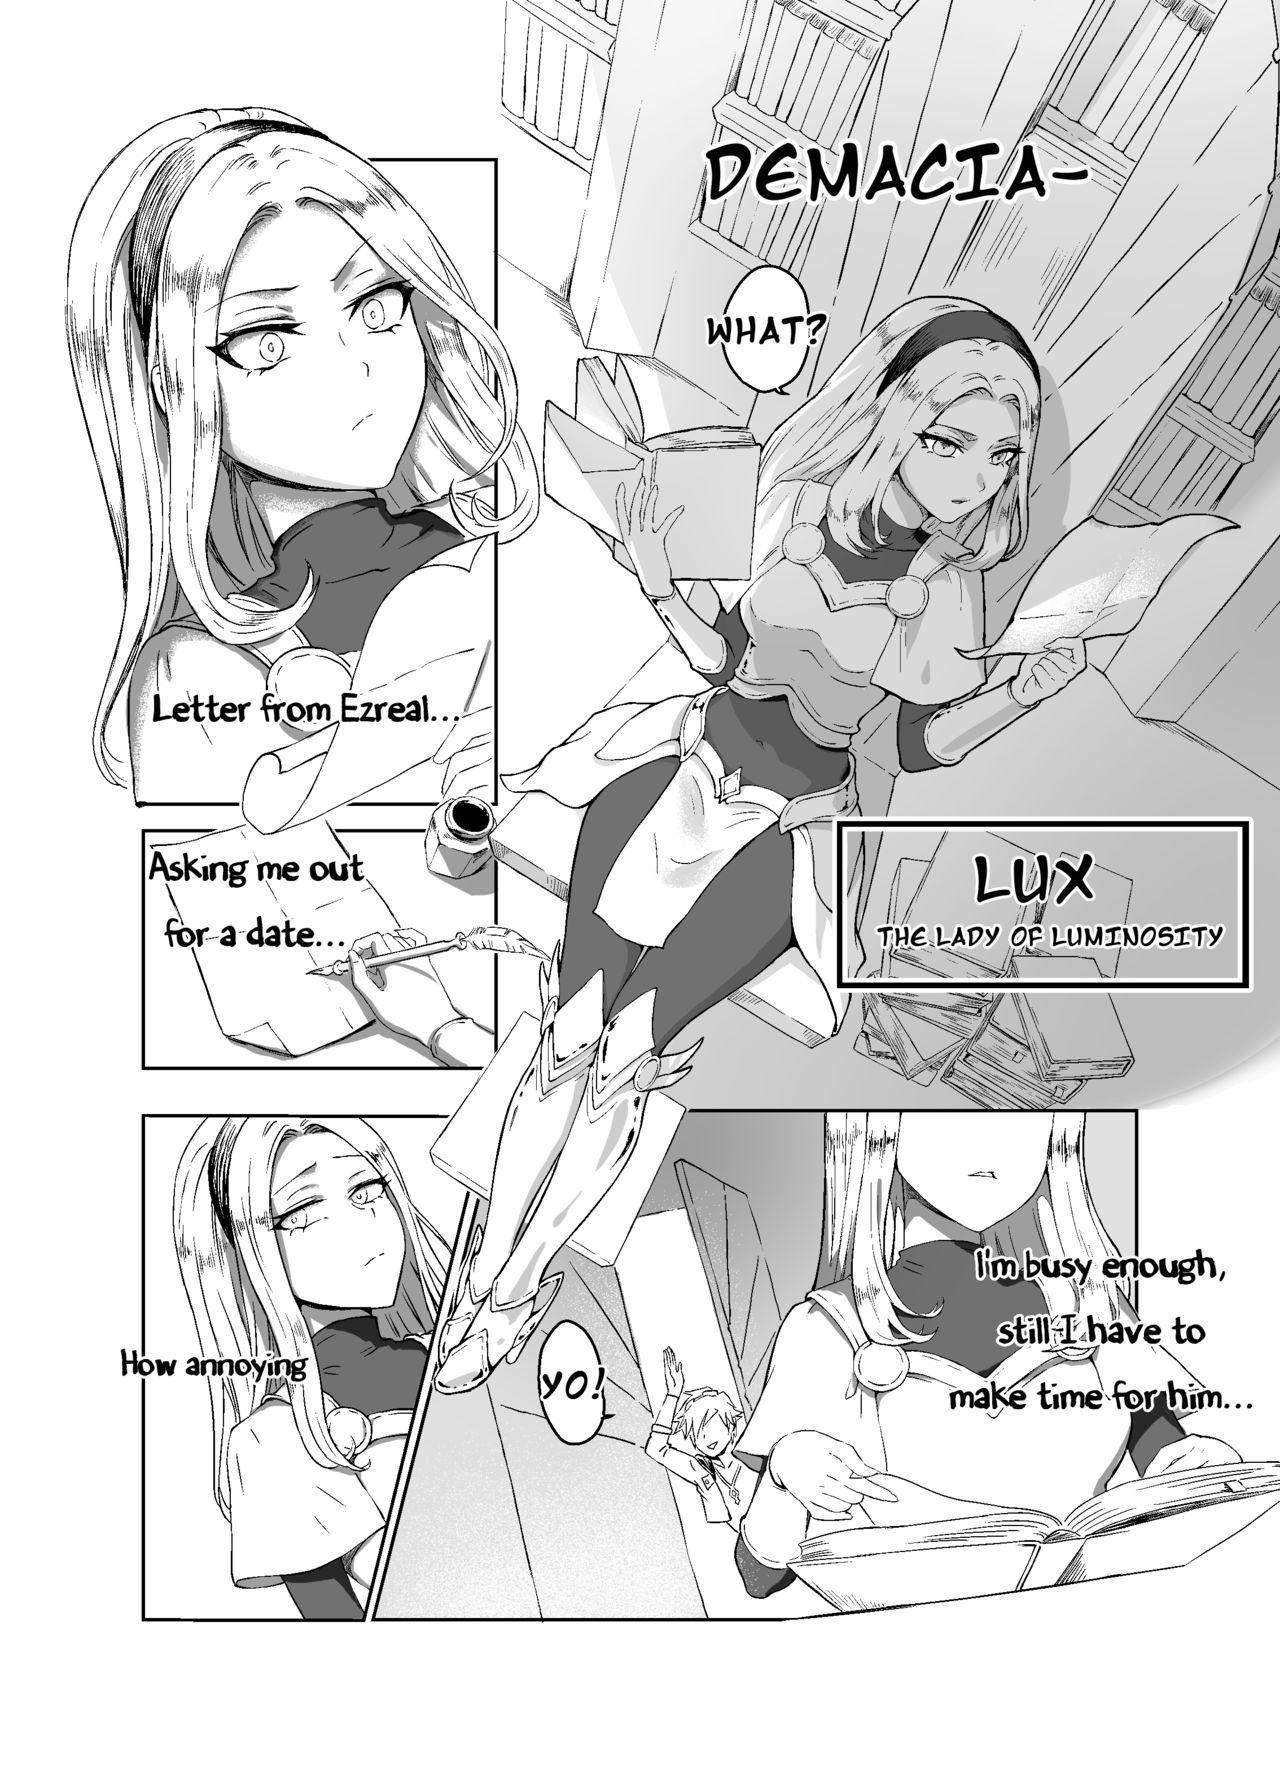 Bitch Lux x Viego ft. Ezreal - League of legends HD - Page 2